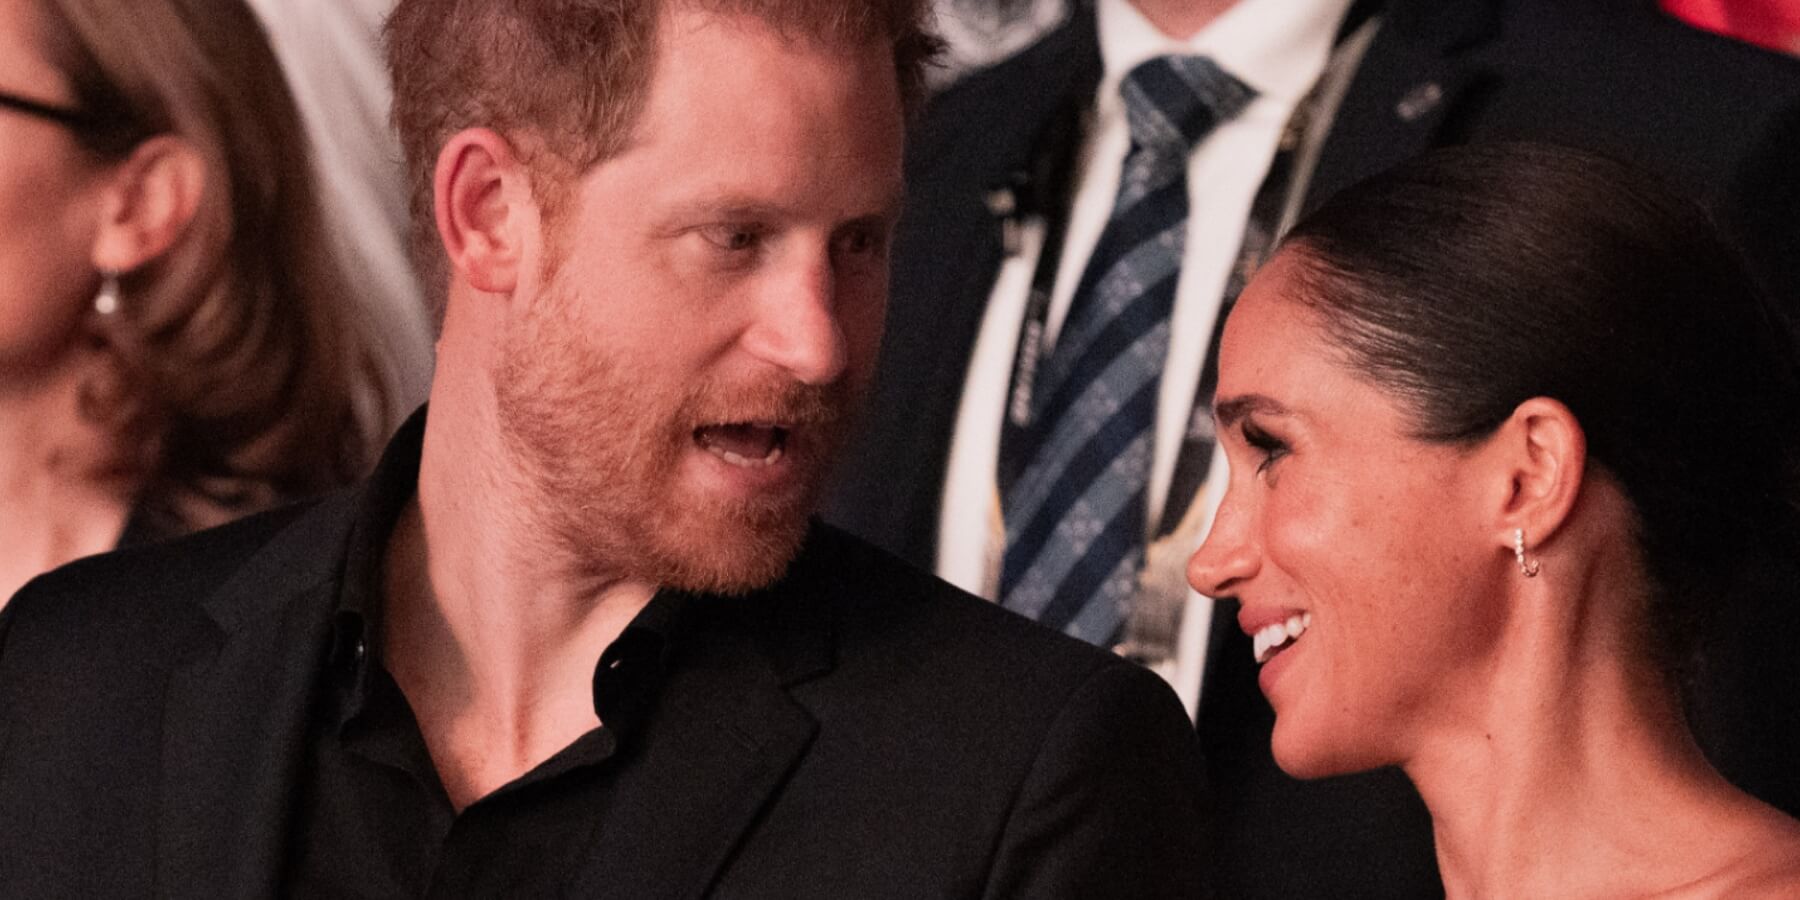 Prince Harry and Meghan Markle photographed the closing ceremony of the 6th Invictus Games at the Merkur Spiel Arena.